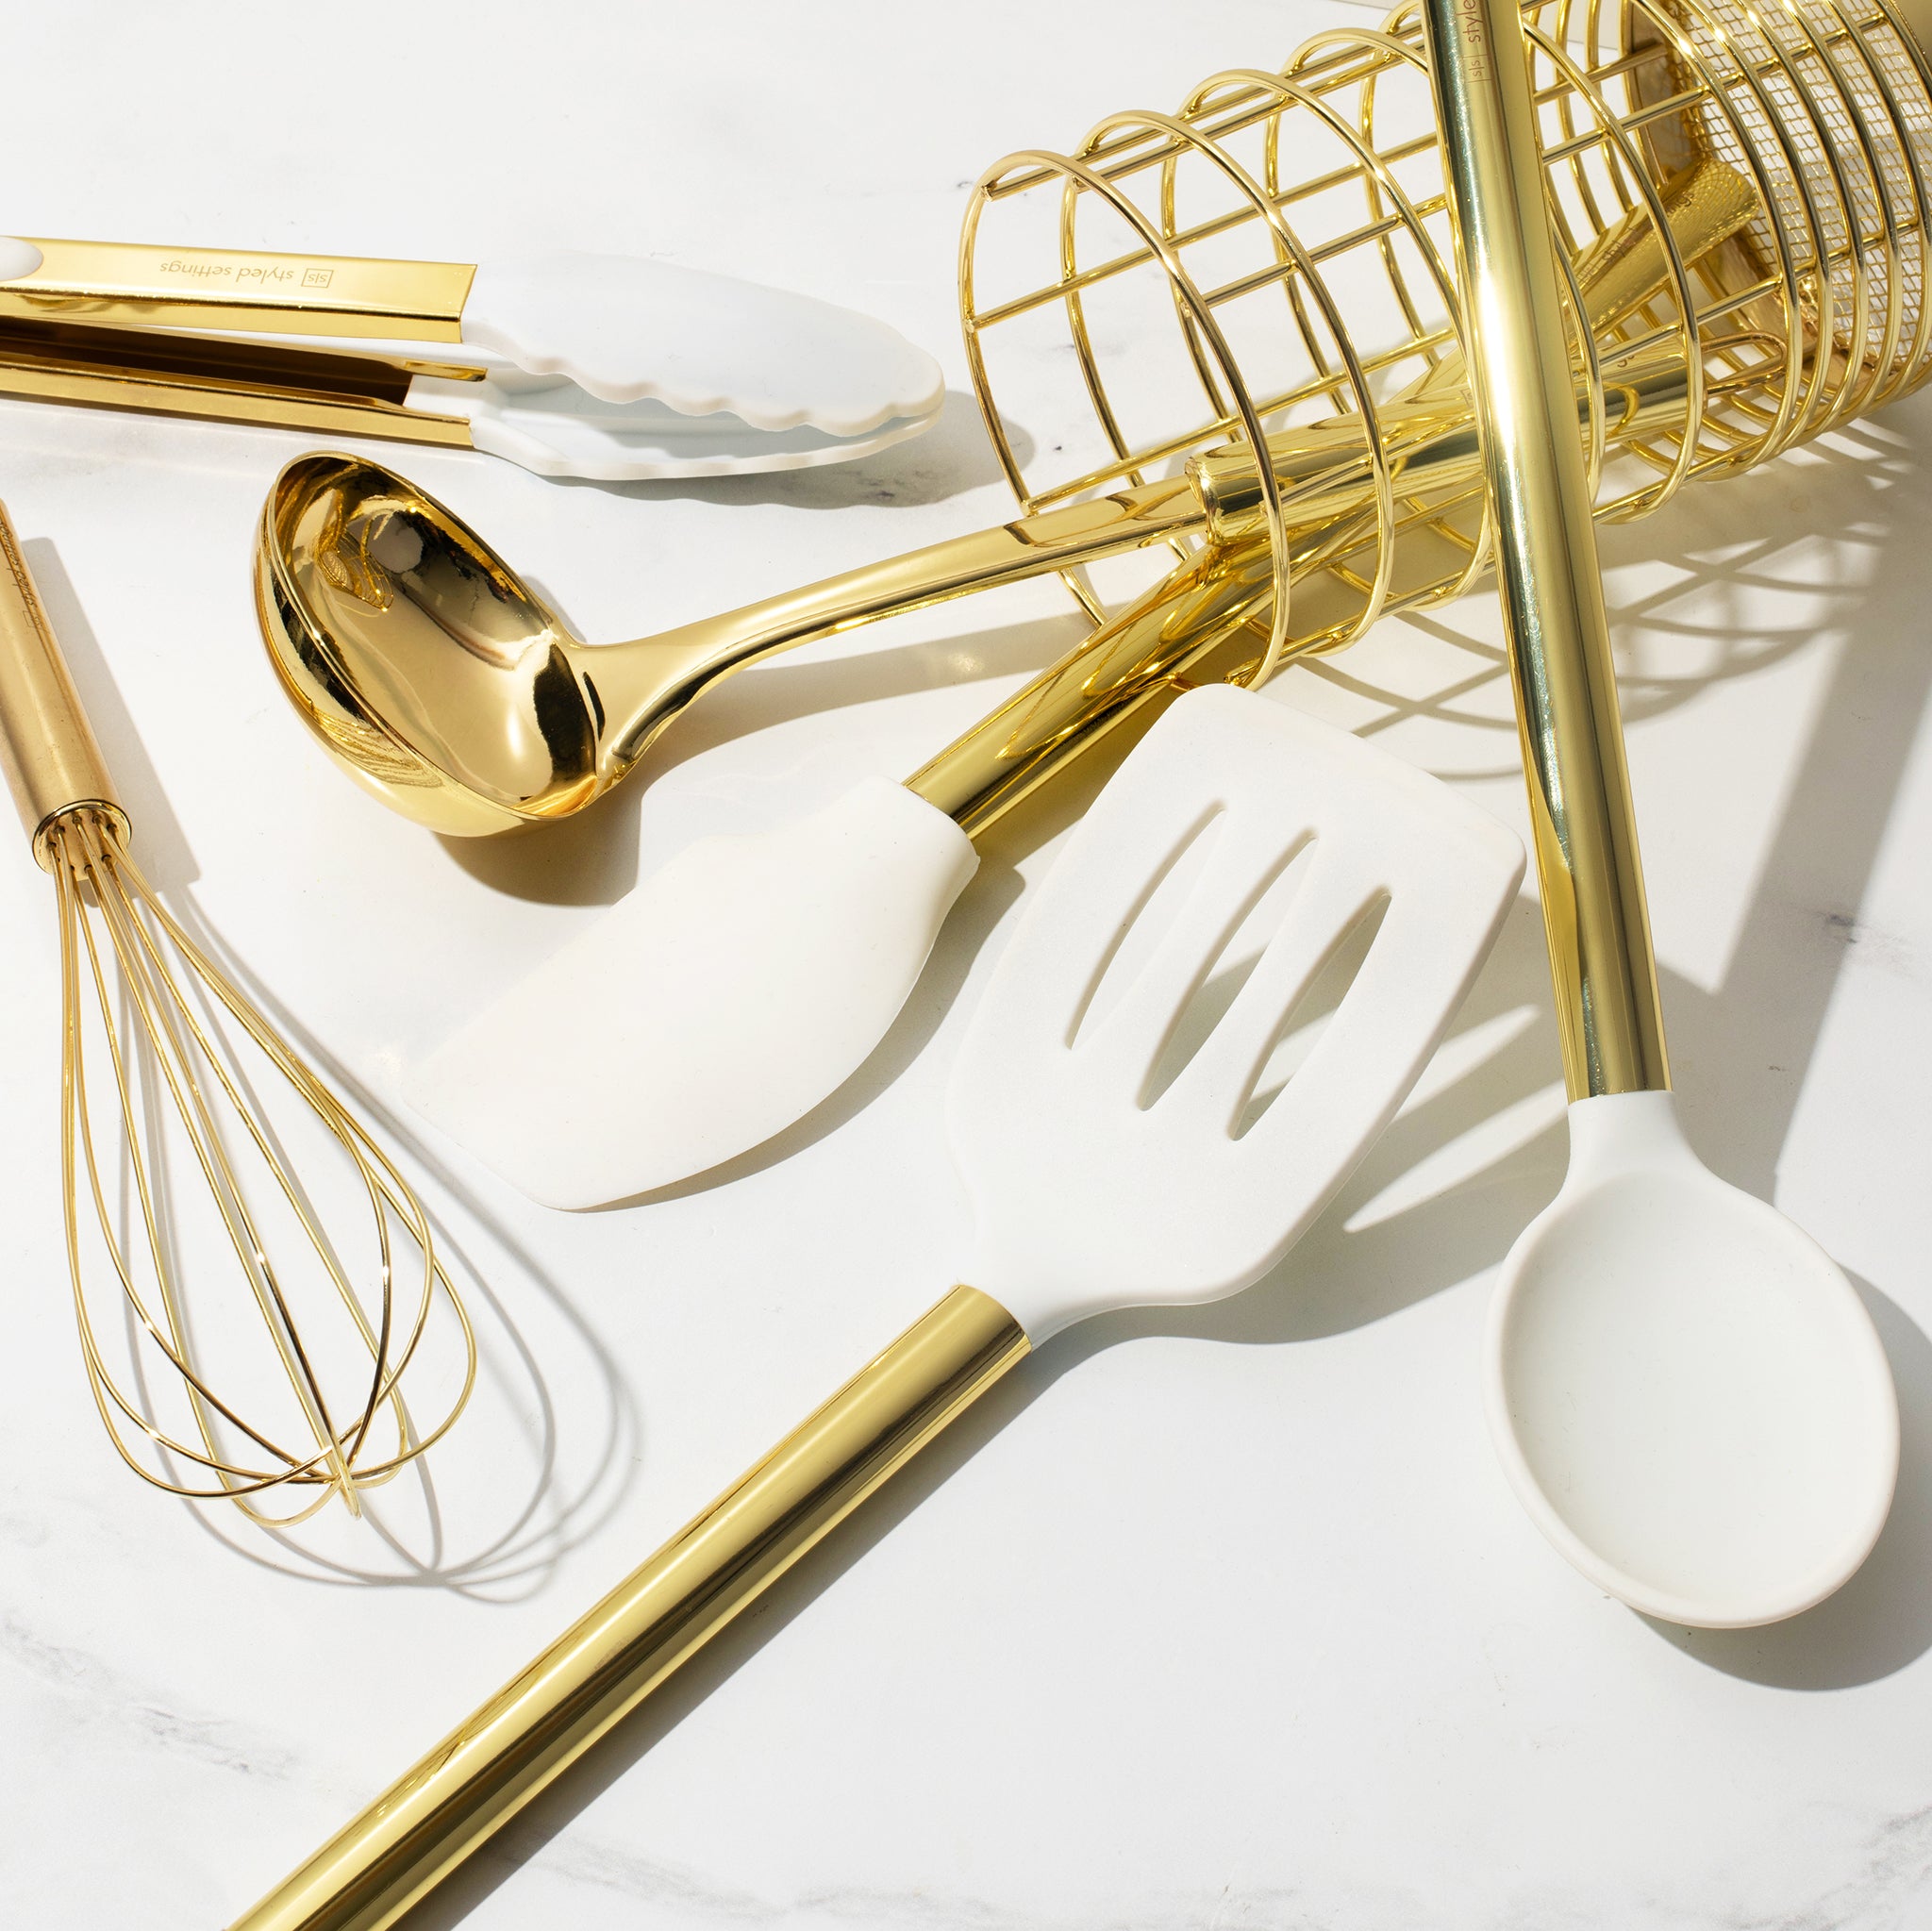 White and Light Gold Kitchen Utensils Set with Holder - Styled Settings